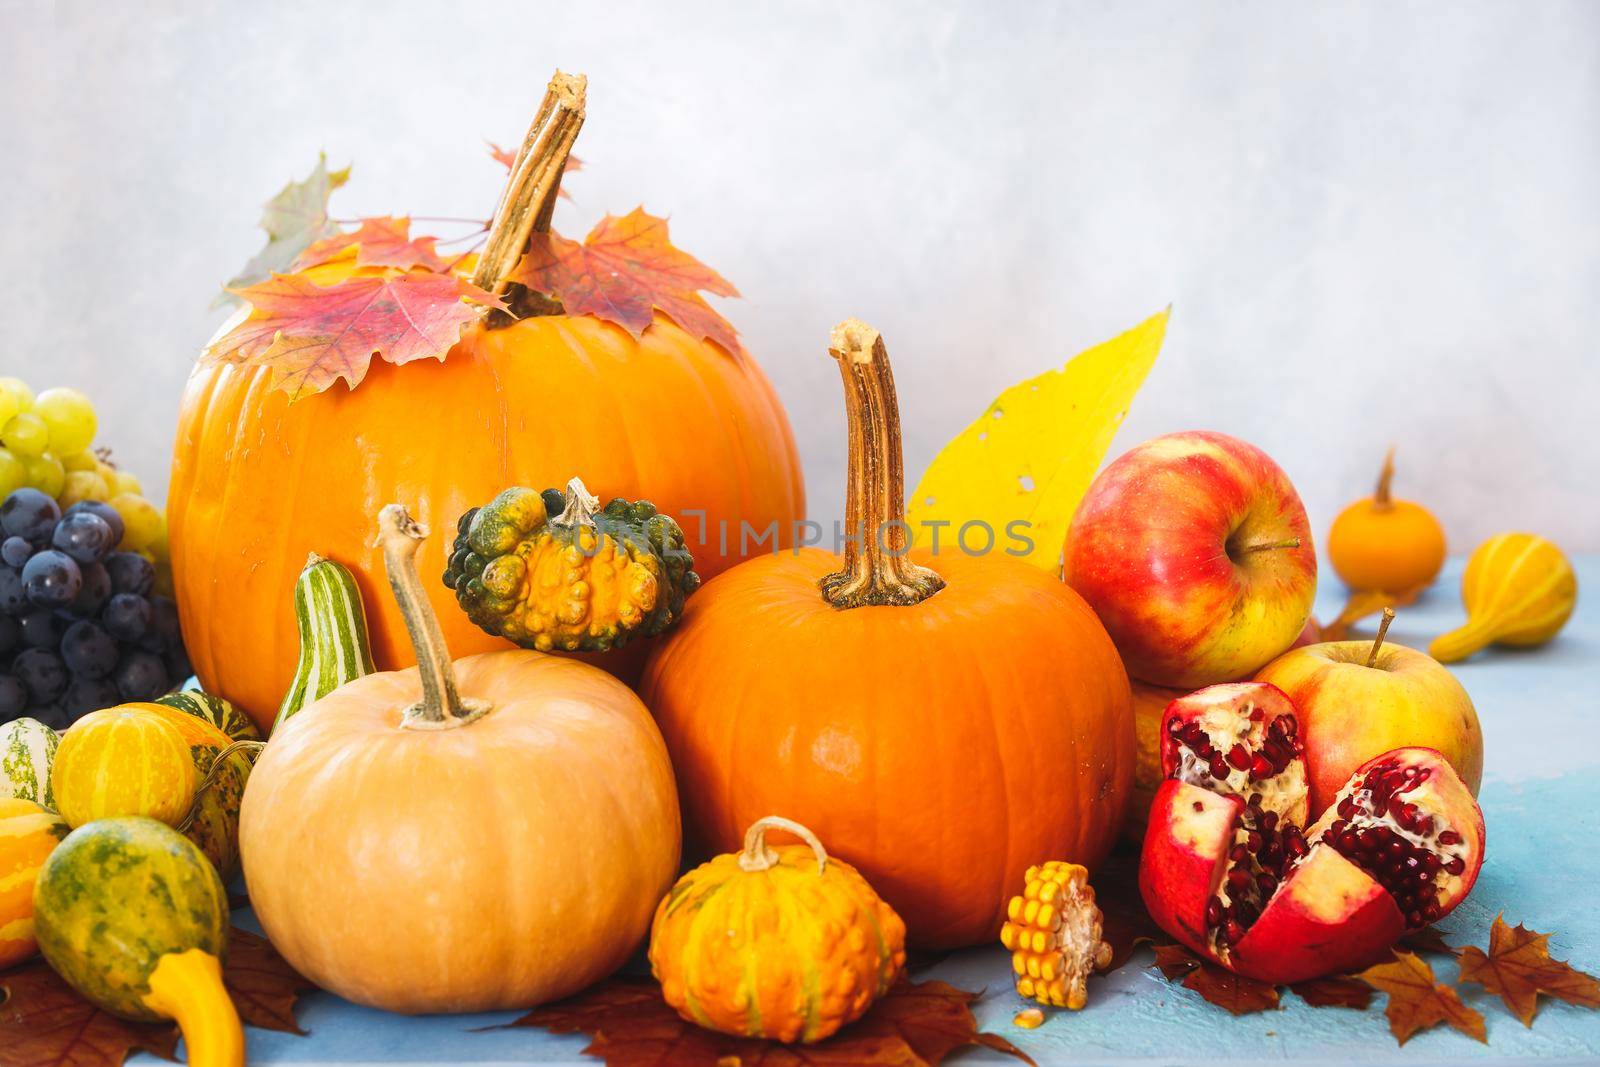 Autumn still life with edible and ornamental pumpkins and gourds, grapes, apple and pomegranate, selective focus